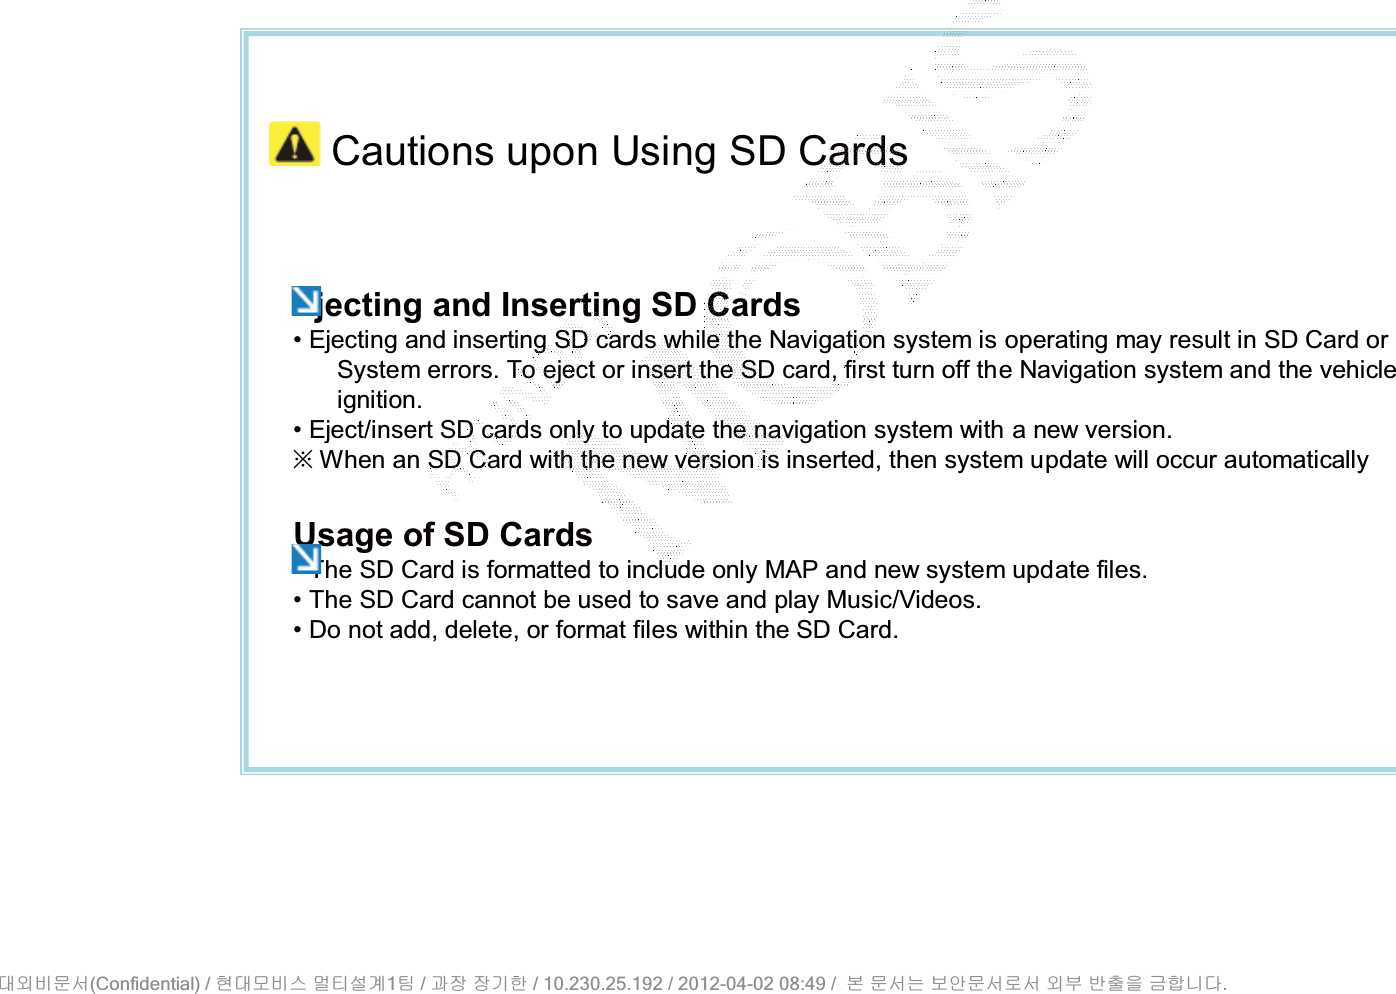 Cautions upon Using SD CardsEjecting and Inserting SD Cards• Ejecting and inserting SD cards while the Navigation system is operating may result in SD Card or System errors. To eject or insert the SD card, first turn off the Navigation system and the vehicle ignition.• Eject/insert SD cards only to update the navigation system with a new version.ȄWhen an SD Card with the new version is inserted, then system update will occur automaticallyUsage of SD Cards• The SD Card is formatted to include only MAP and new system update files.• The SD Card cannot be used to save and play Music/Videos.• Do not add, delete, or format files within the SD Card.(Confidential) /    1  /     / 10.230.25.192 / 2012-04-02 08:49 /             .␴㞬⽸ⱬ㉐ 䜸␴⯜⽸㏘ ⭴䐤㉘᷸ 䐴 Ḱ㣙 㣙ὤ䚐 ⸬ ⱬ㉐⏈ ⸨㙼ⱬ㉐⦐㉐ 㞬⺴ ⵌ㻐㡸 Ἴ䚝⏼␘